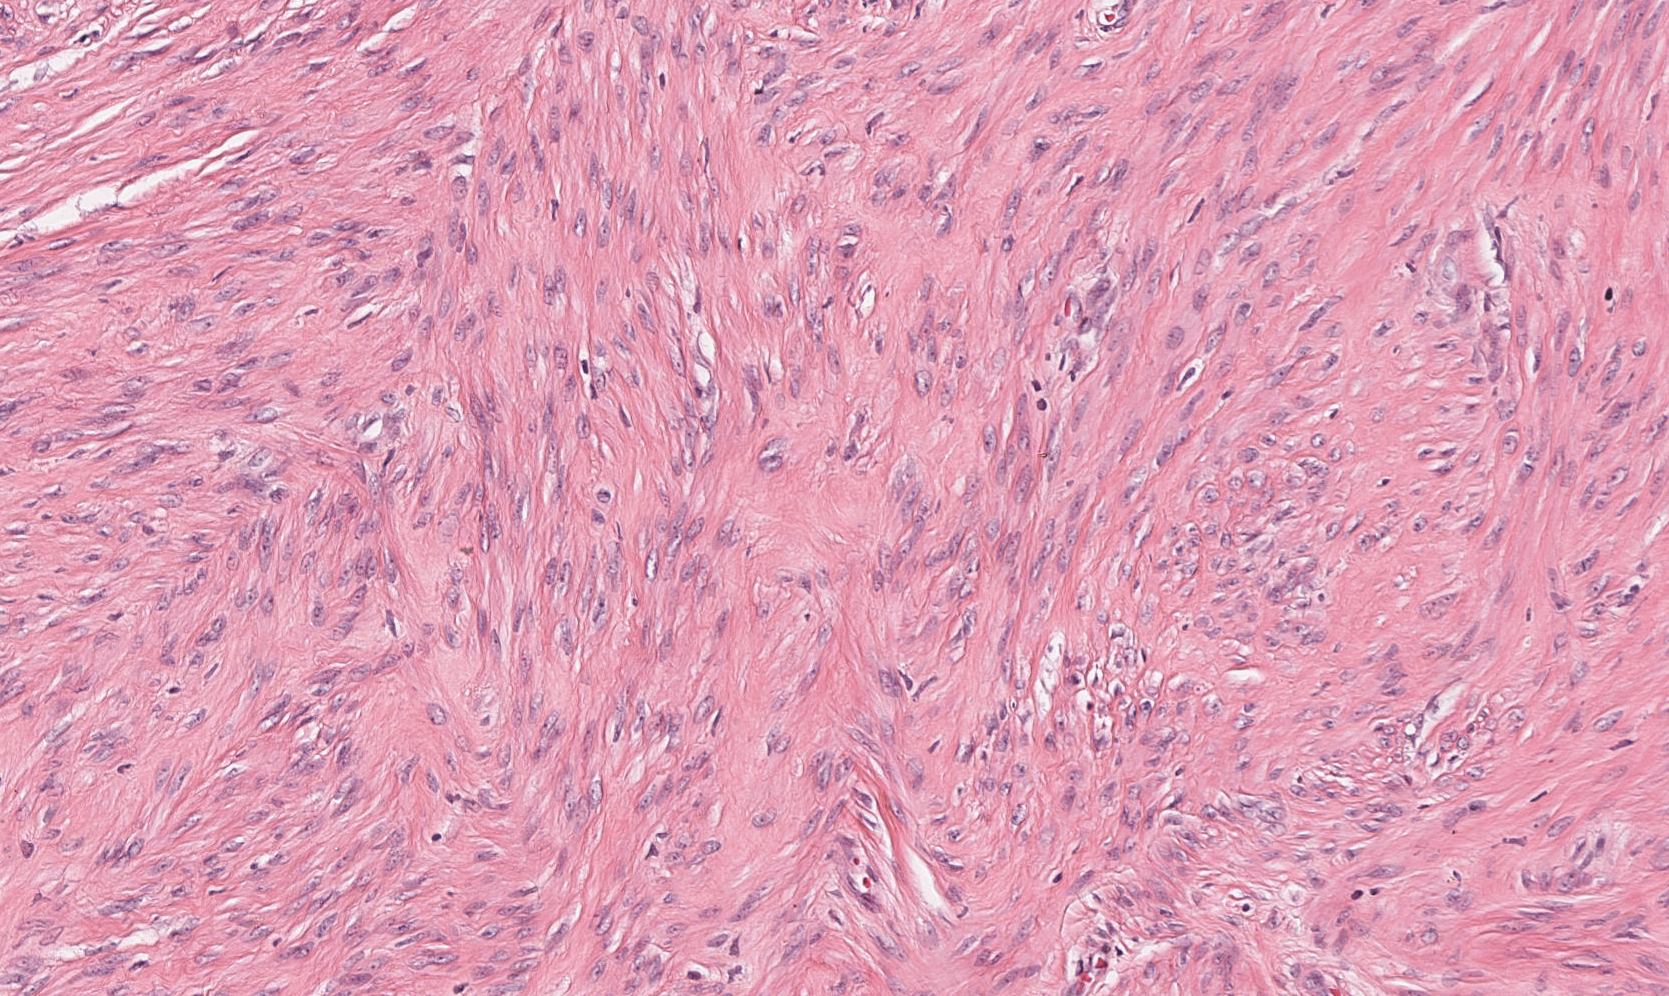 Histologic appearance of a leiomyoma showing intersecting fascicles of cells that have elongated (spindle-shaped) nuclei.